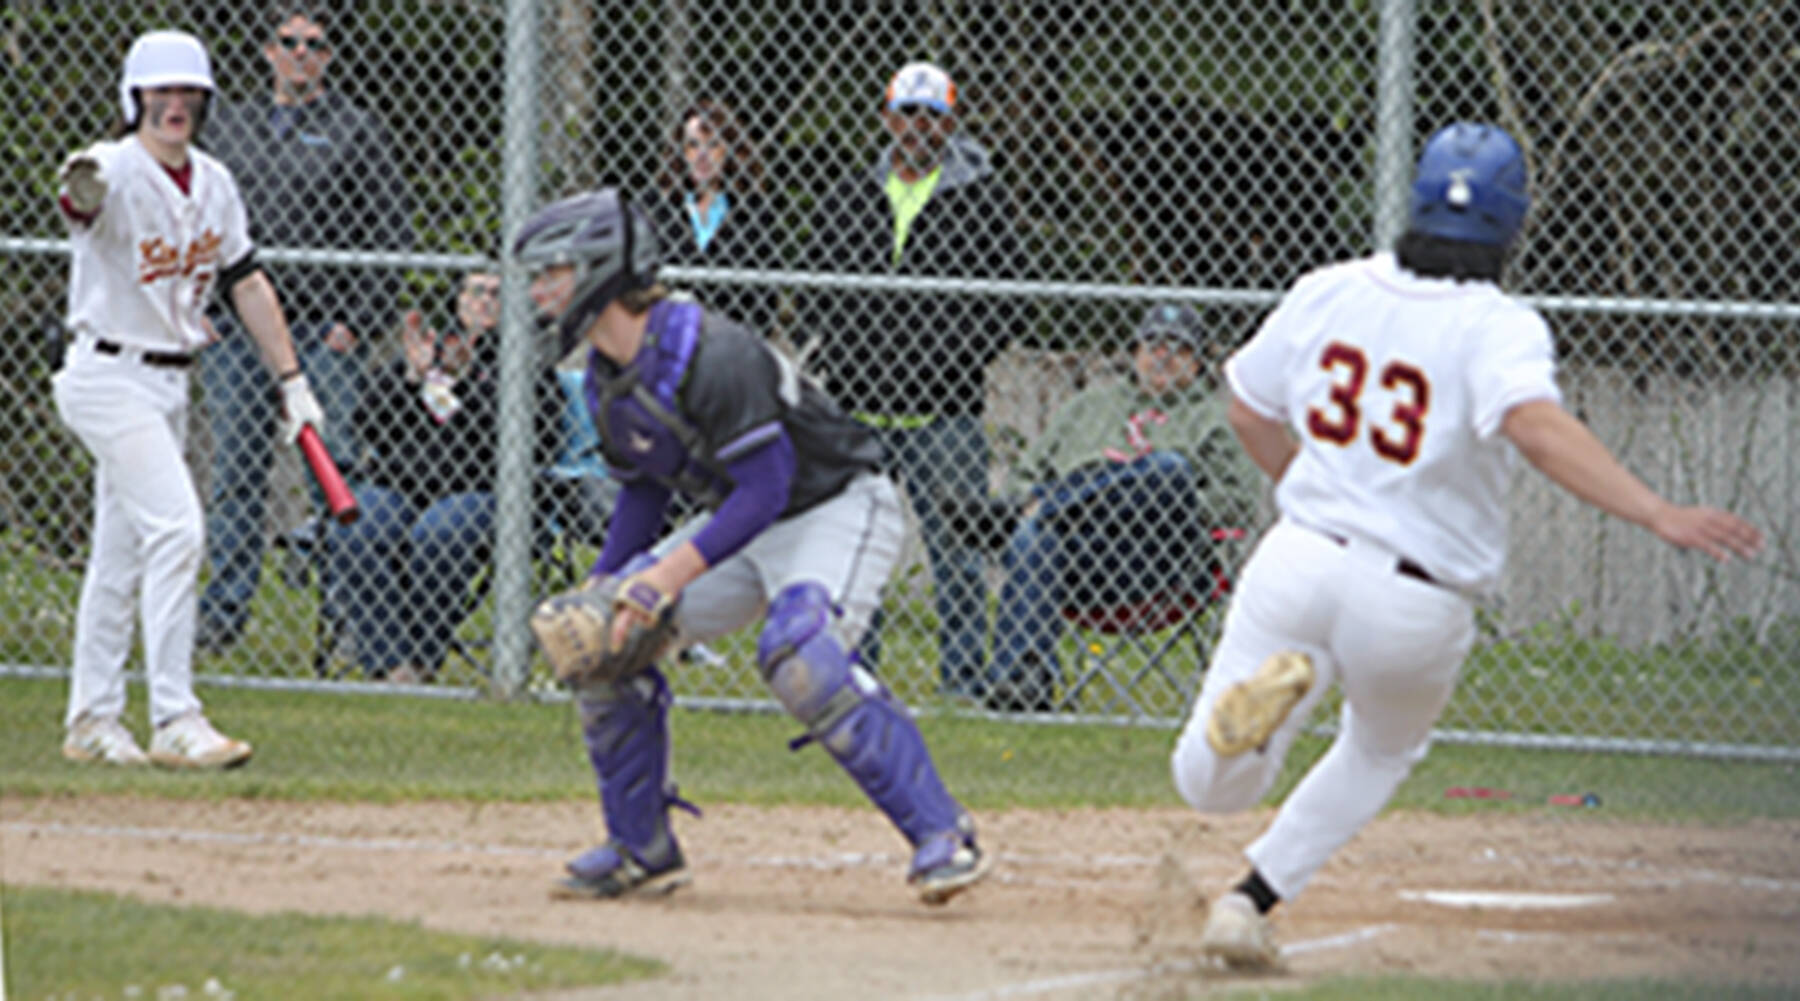 Kingston sophomore Peau Tameilau (33) slides safety into home plate as catcher Colton Bower of North Kitsap awaits the throw. Steve Powell/North Kitsap Herald photos